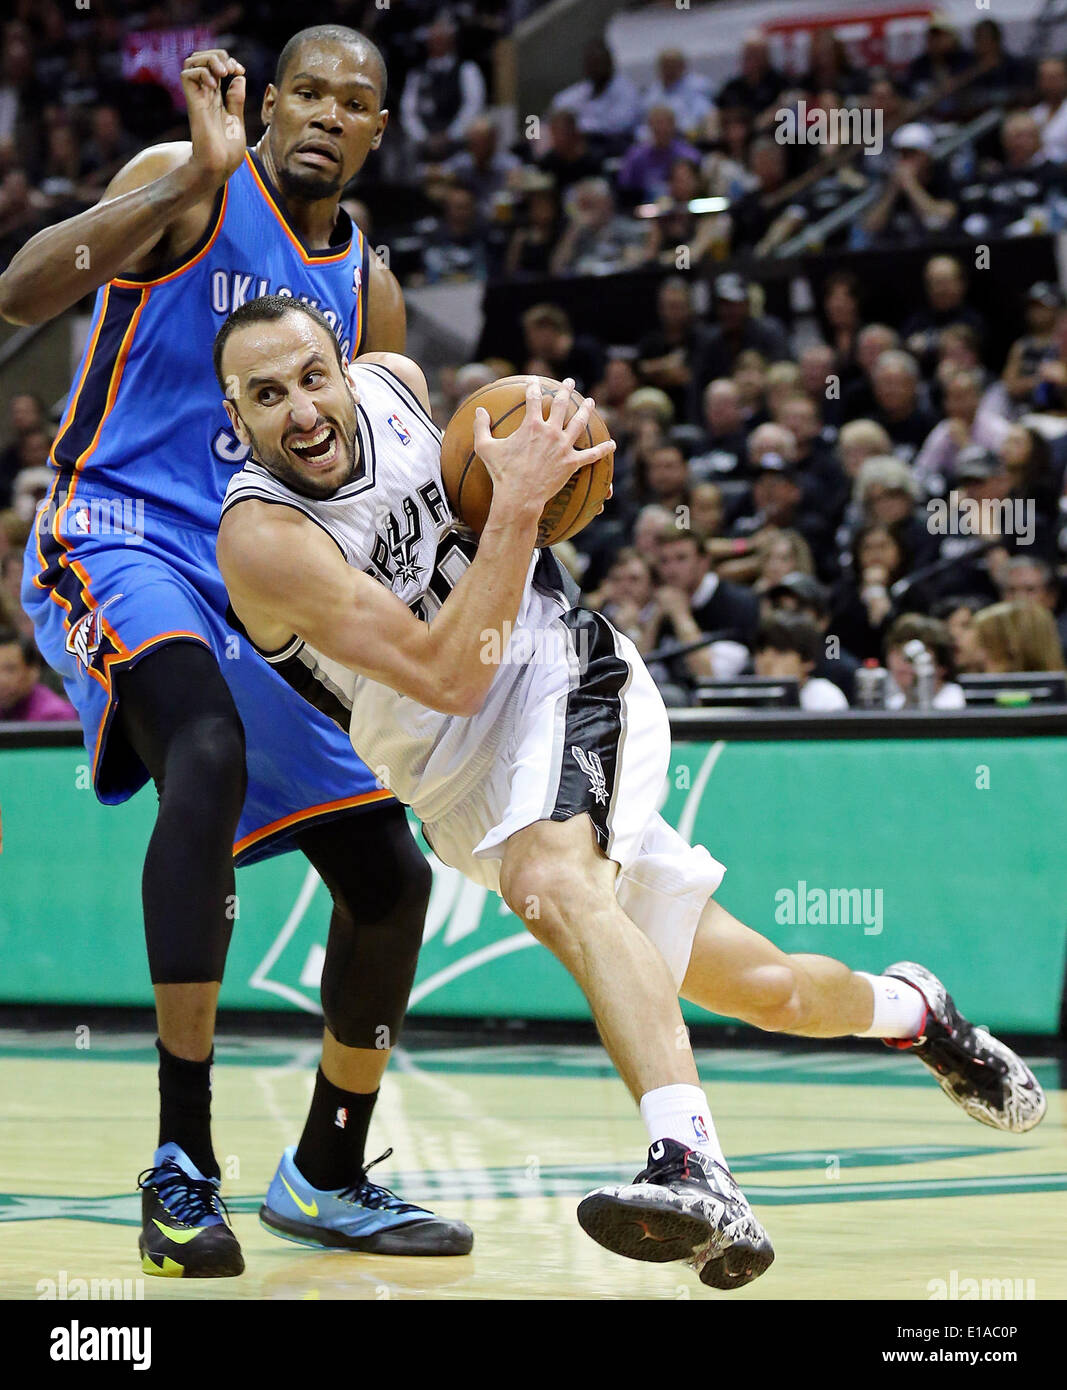 May 19, 2014 - San Antonio, TEXAS, USA - San Antonio Spurs' Manu Ginobili drives around Oklahoma City Thunder's Kevin Durant during second half action of Game 1 in the Western Conference Finals Monday May 19, 2014 at the AT&T Center. The Spurs won 122-105. (Credit Image: © San Antonio Express-News/ZUMAPRESS.com) Stock Photo